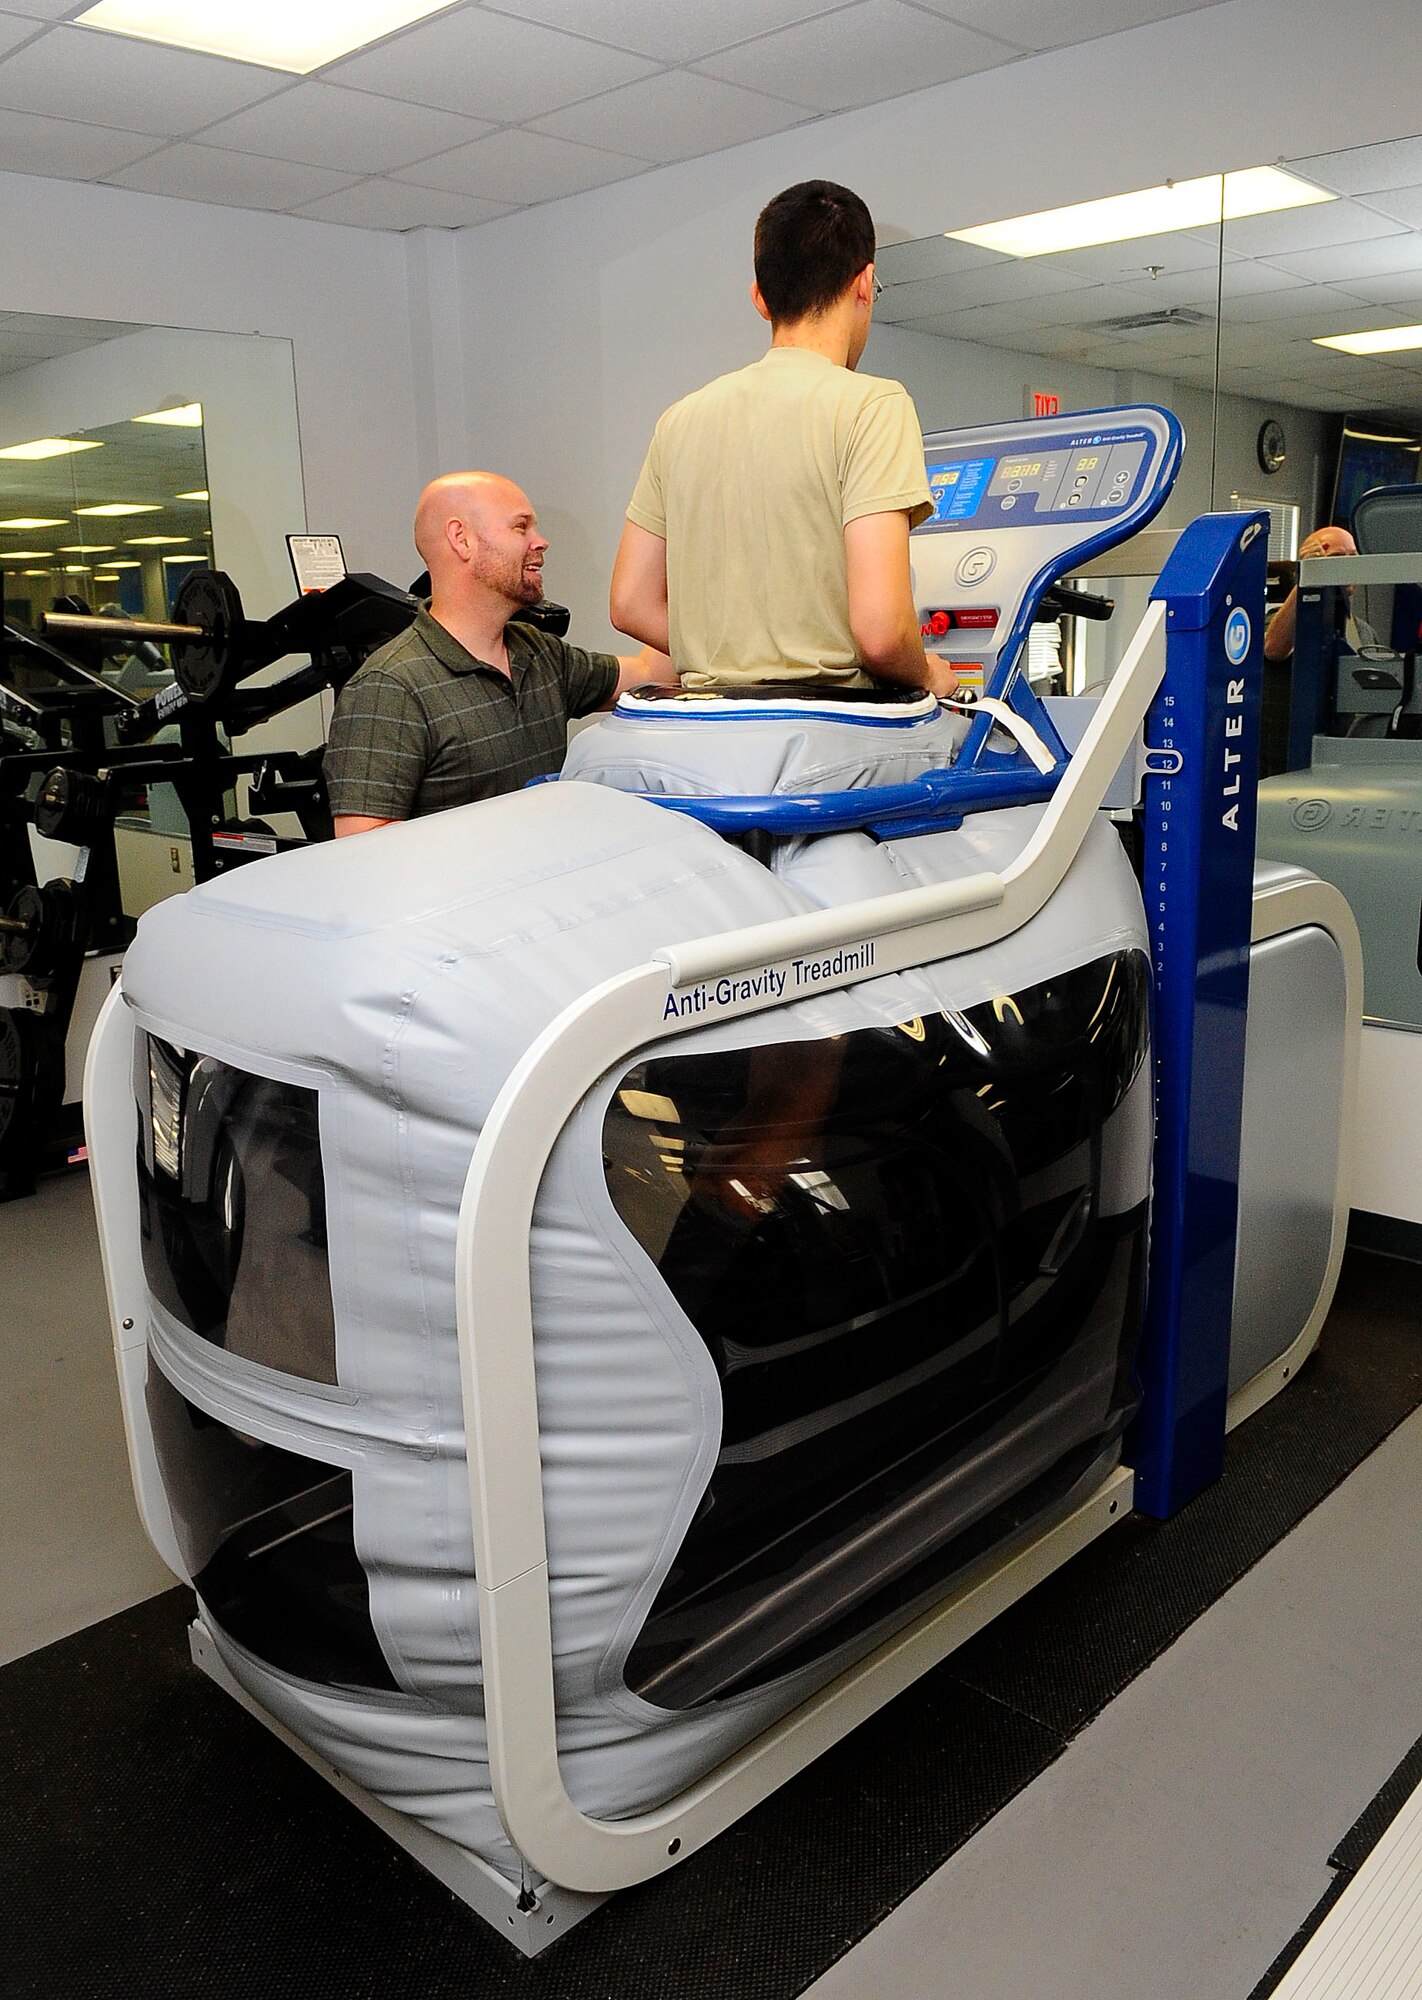 Eddie Capps, 1st Special Operations Medical Operations Squadron physical therapist assistant, assists Airman 1st Class Timothy Montano, 1st Special Operations Medical Operations Squadron physical therapist technician, on the Anti-Gravity Treadmill on Hurlburt Field, Fla., Jan. 14, 2015.  The treadmill is used to increase the training load for exercise-induced injuries; this helps Airmen work back into proper running form. (U.S. Air Force photo/Airman 1st Class Andrea Posey)